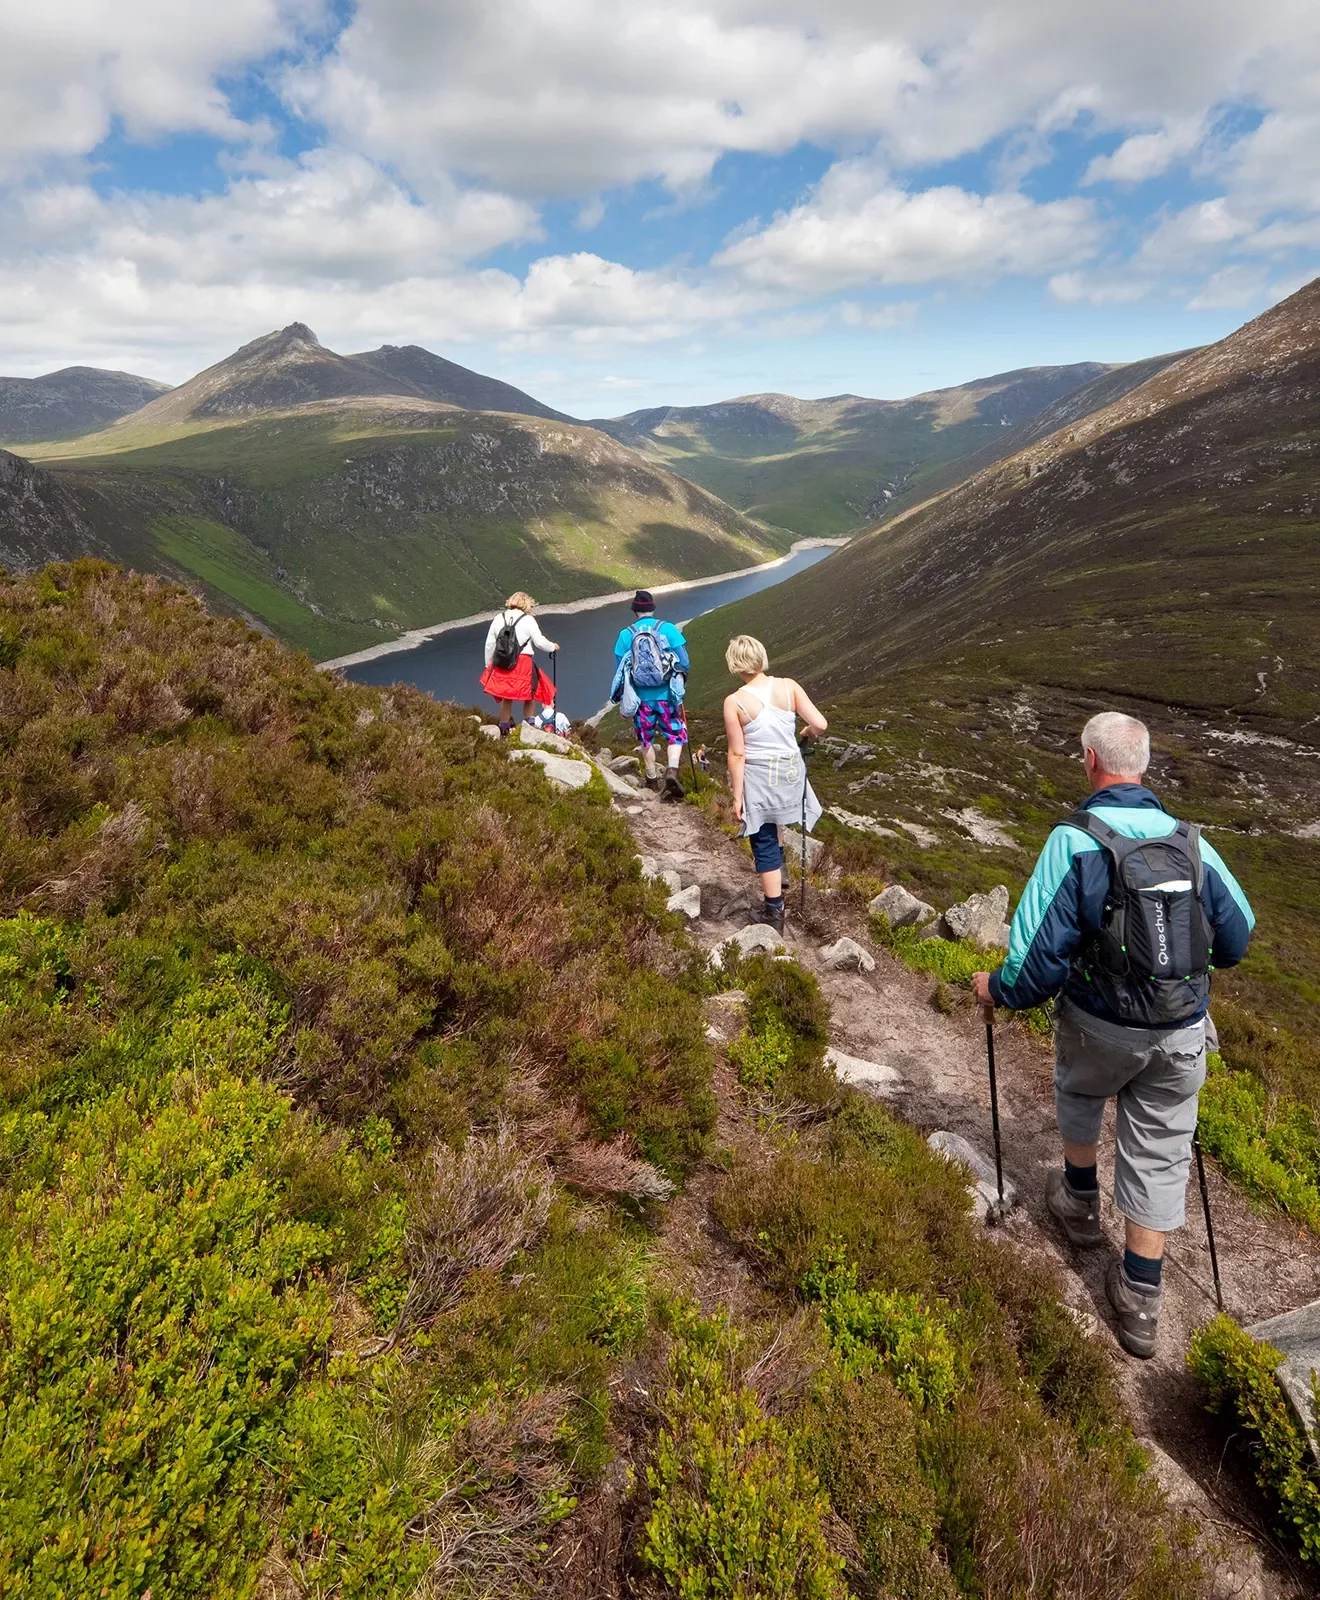 Four hikers with walking poles descending a grassy trail